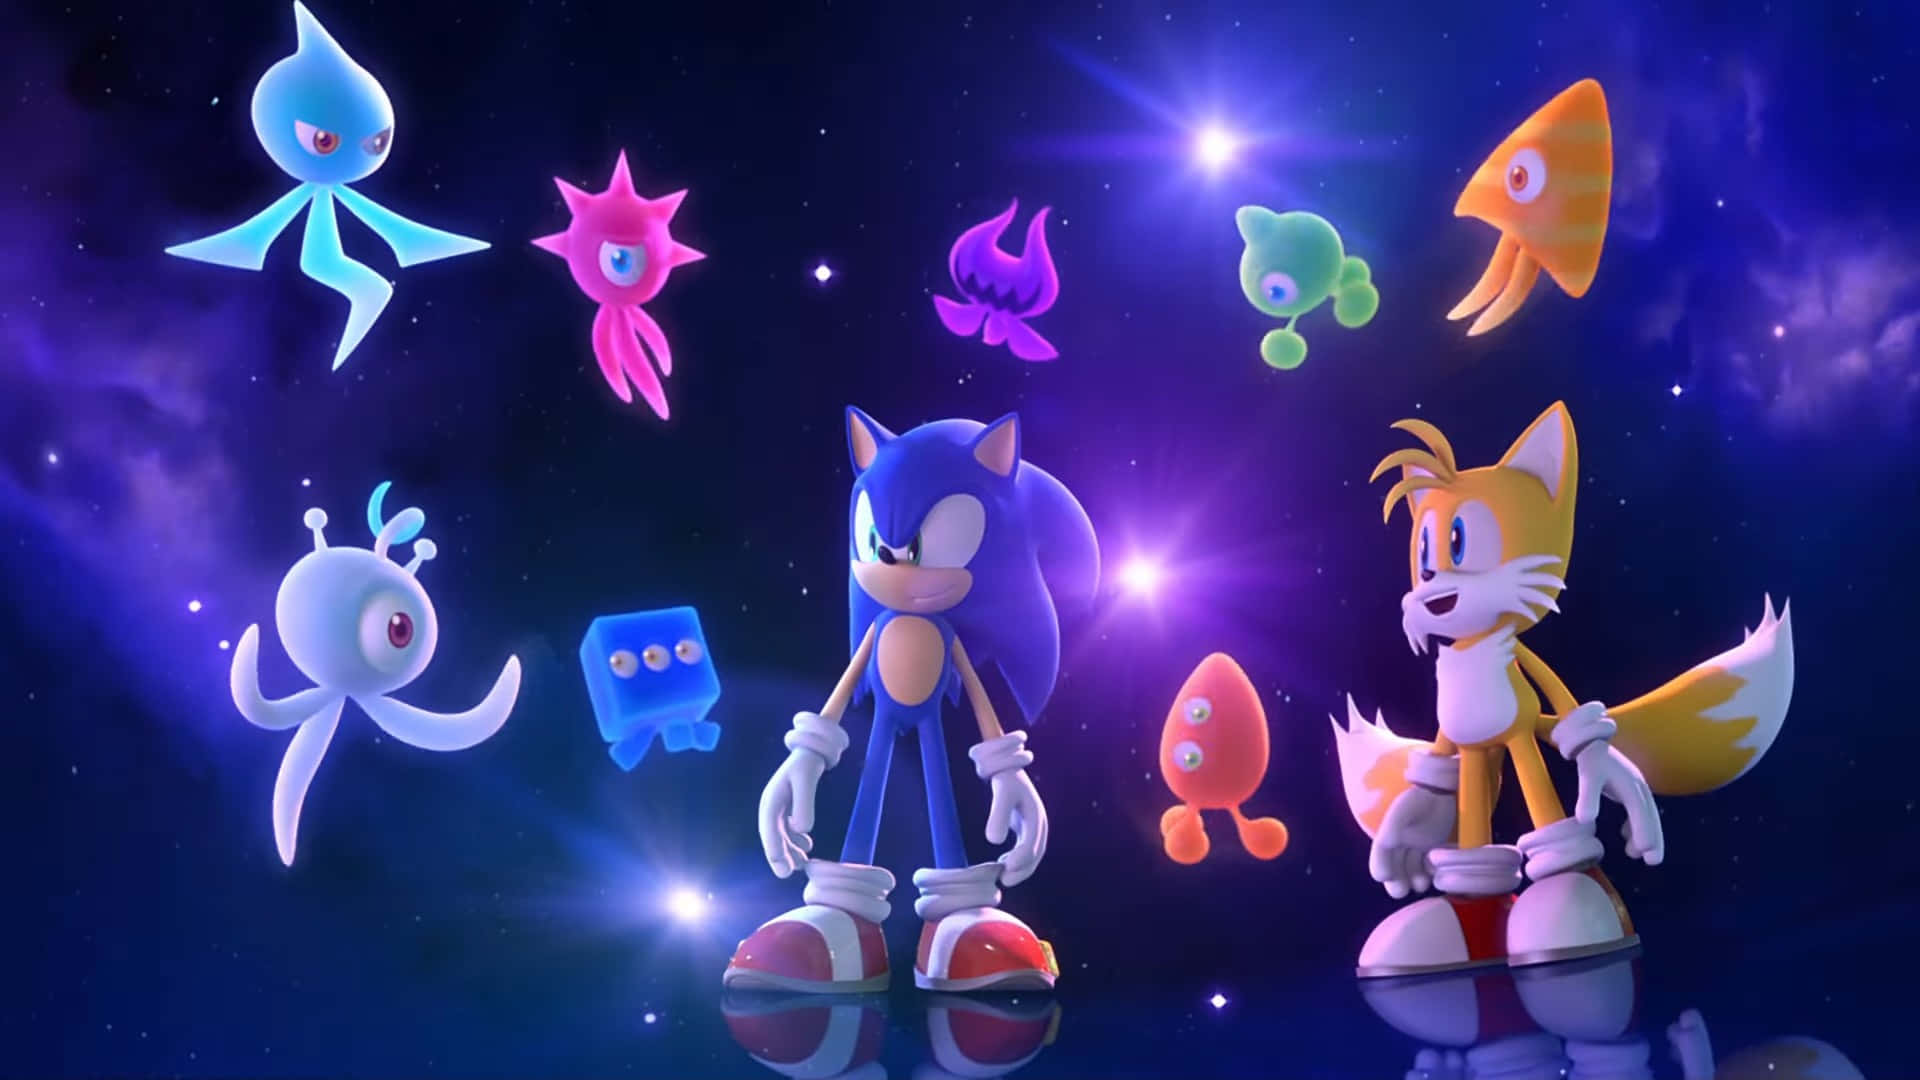 Unleash your creativity with Sonic in Sonic Colors Wallpaper